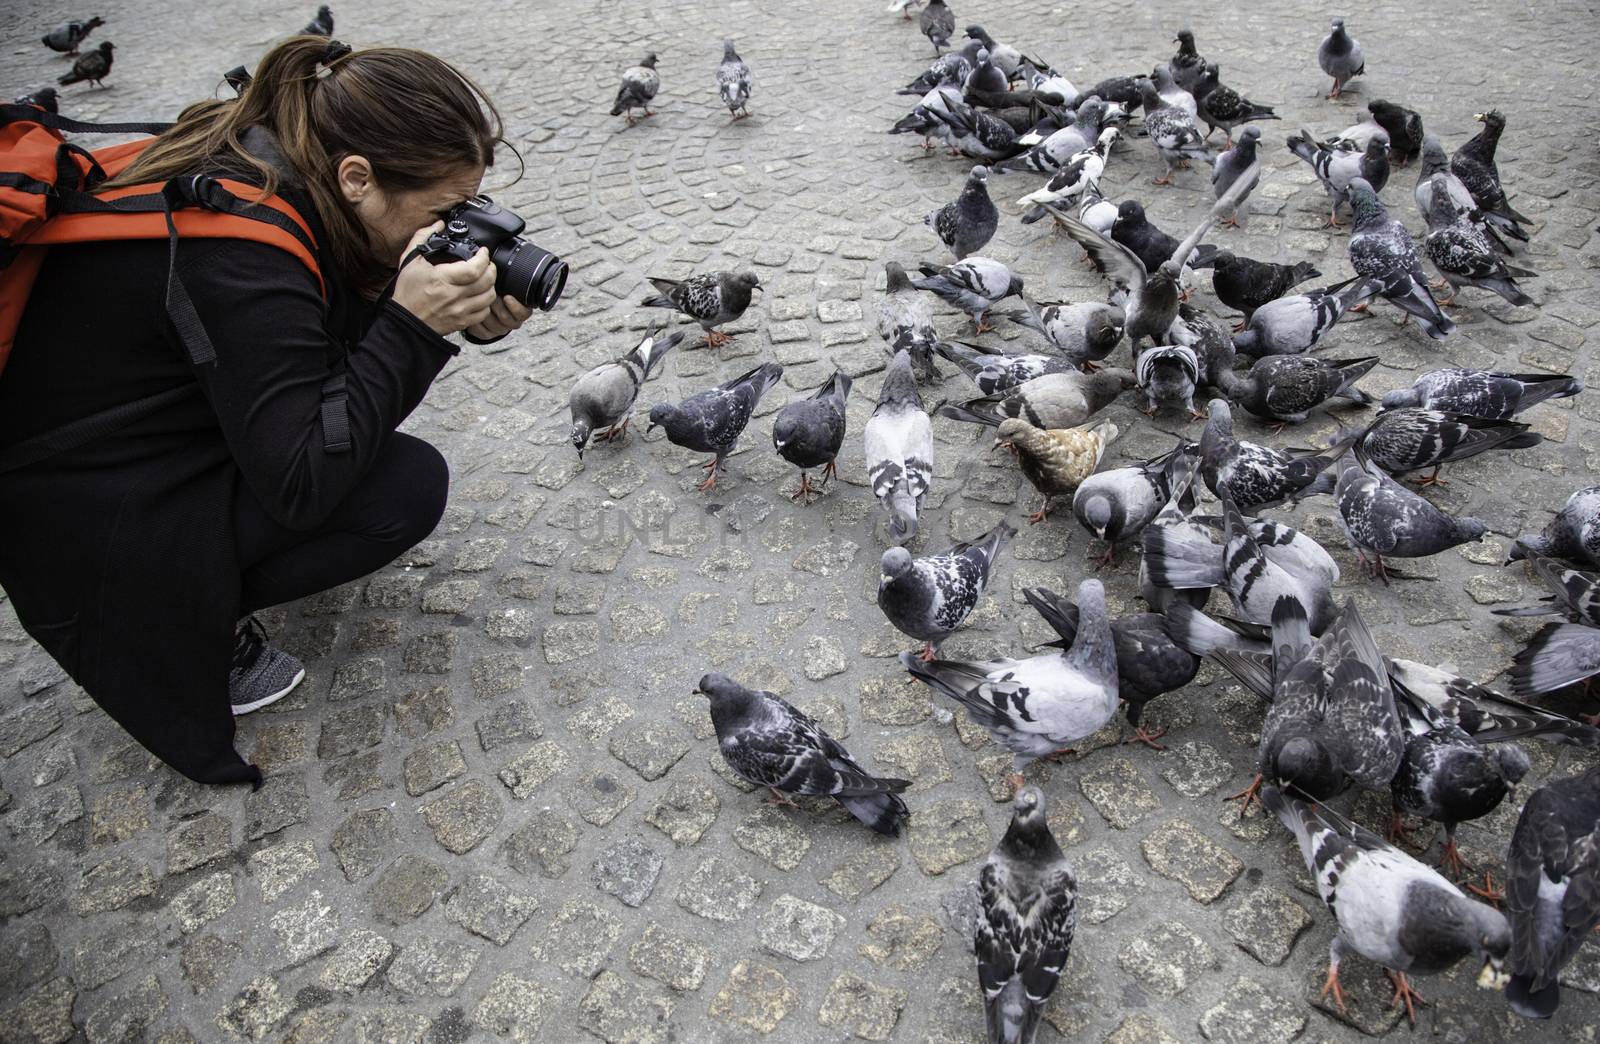 Feeding the pigeons, detail of a woman photographing the birds